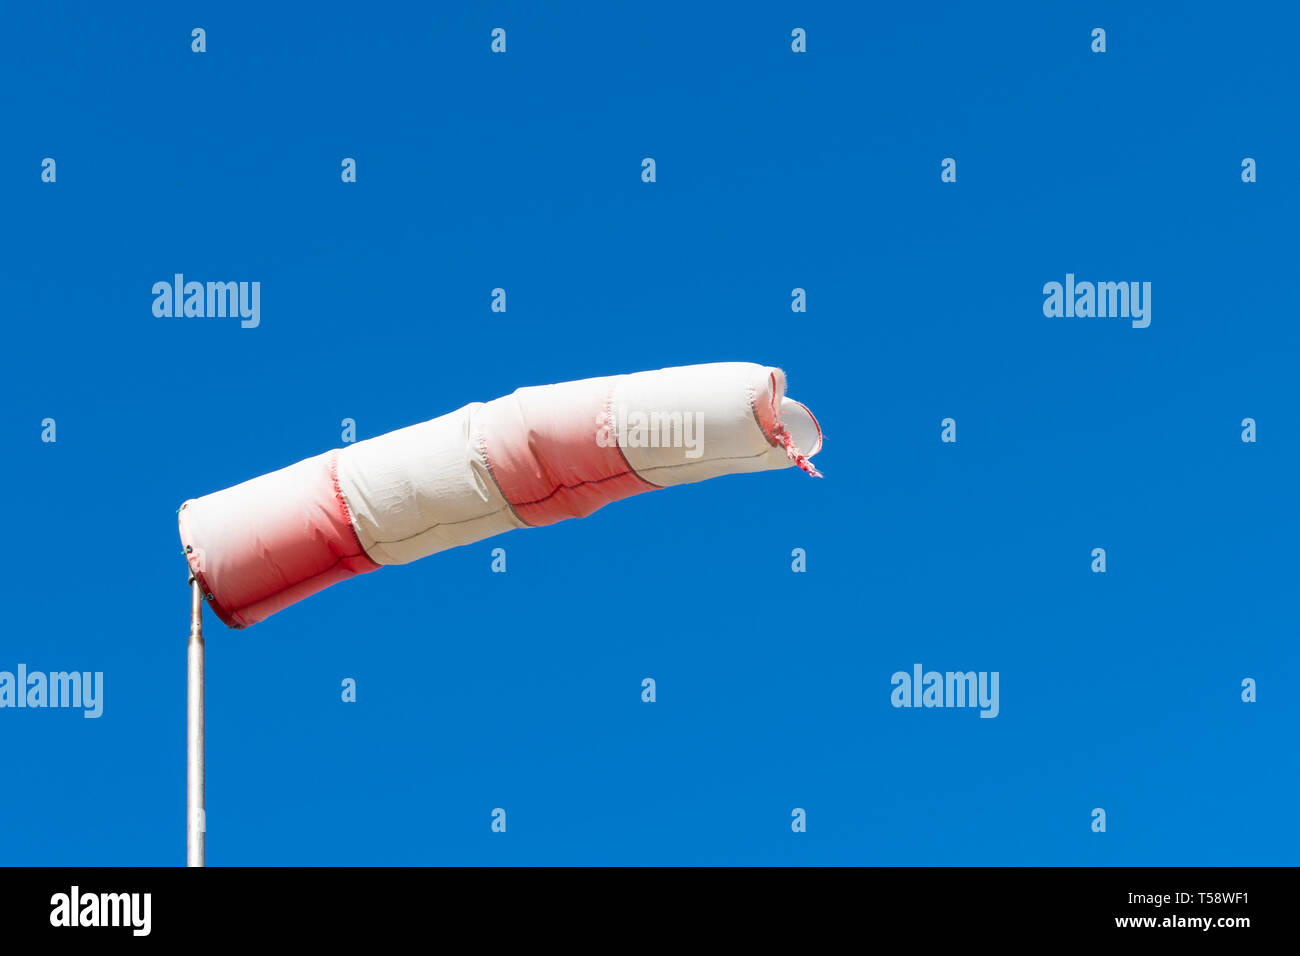 Red White windsock indicating from where the wind comes with a blue background Stock Photo